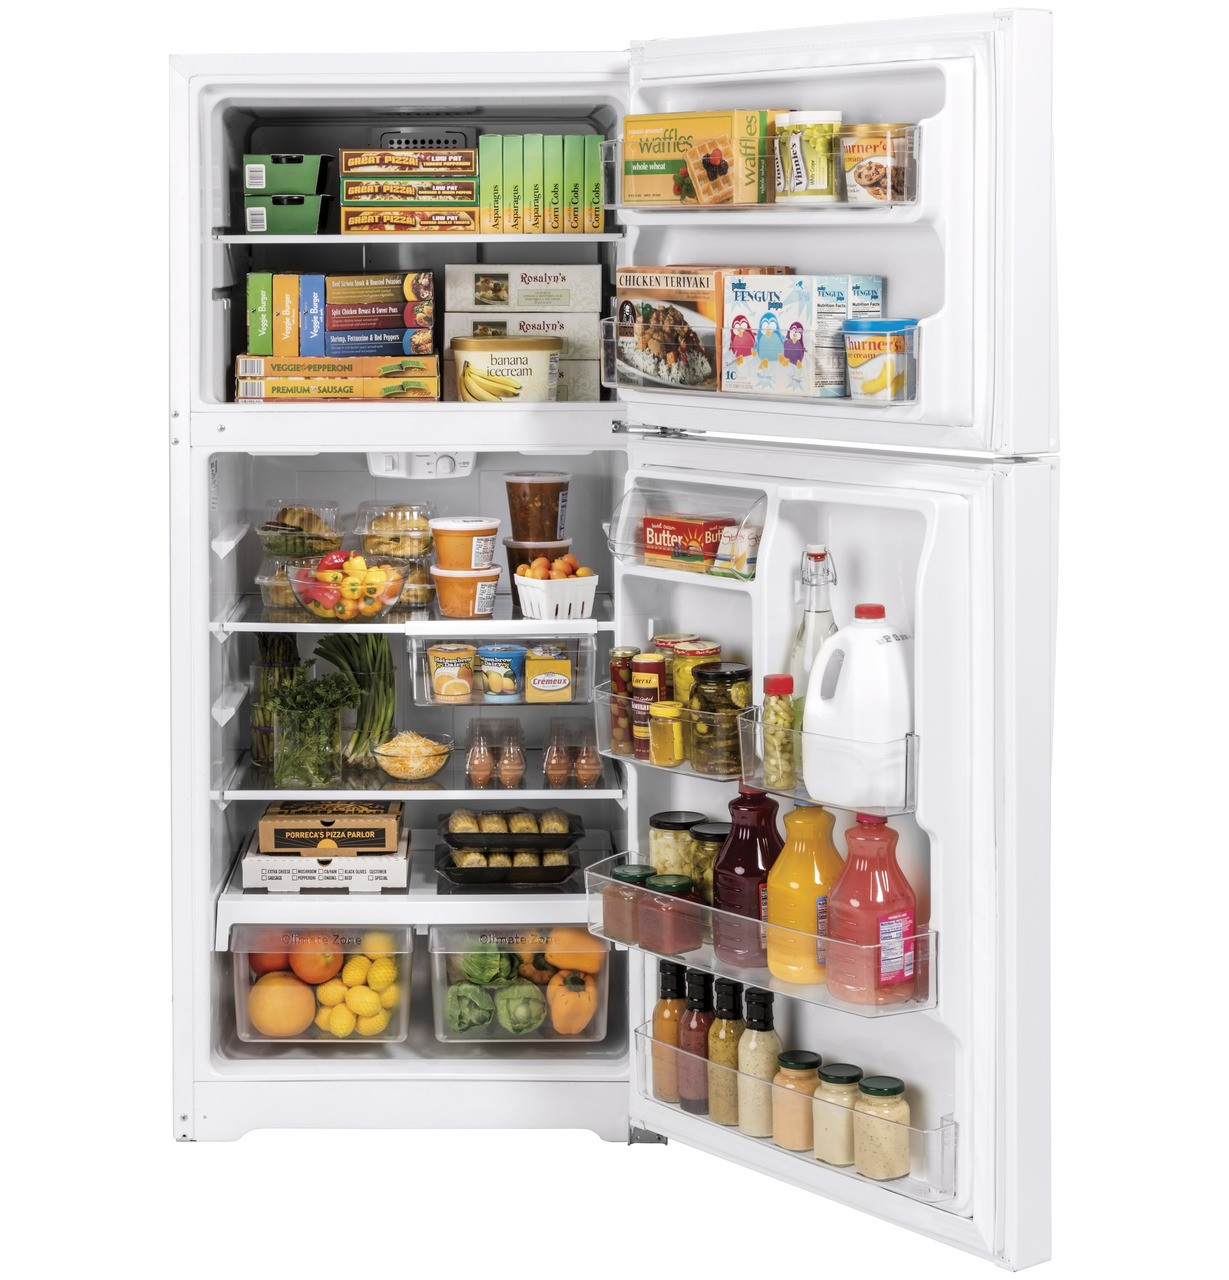 GE 21.9 cu. ft. Top Freezer Refrigerator in White, Garage Ready GTS22KGNRWW  - The Home Depot